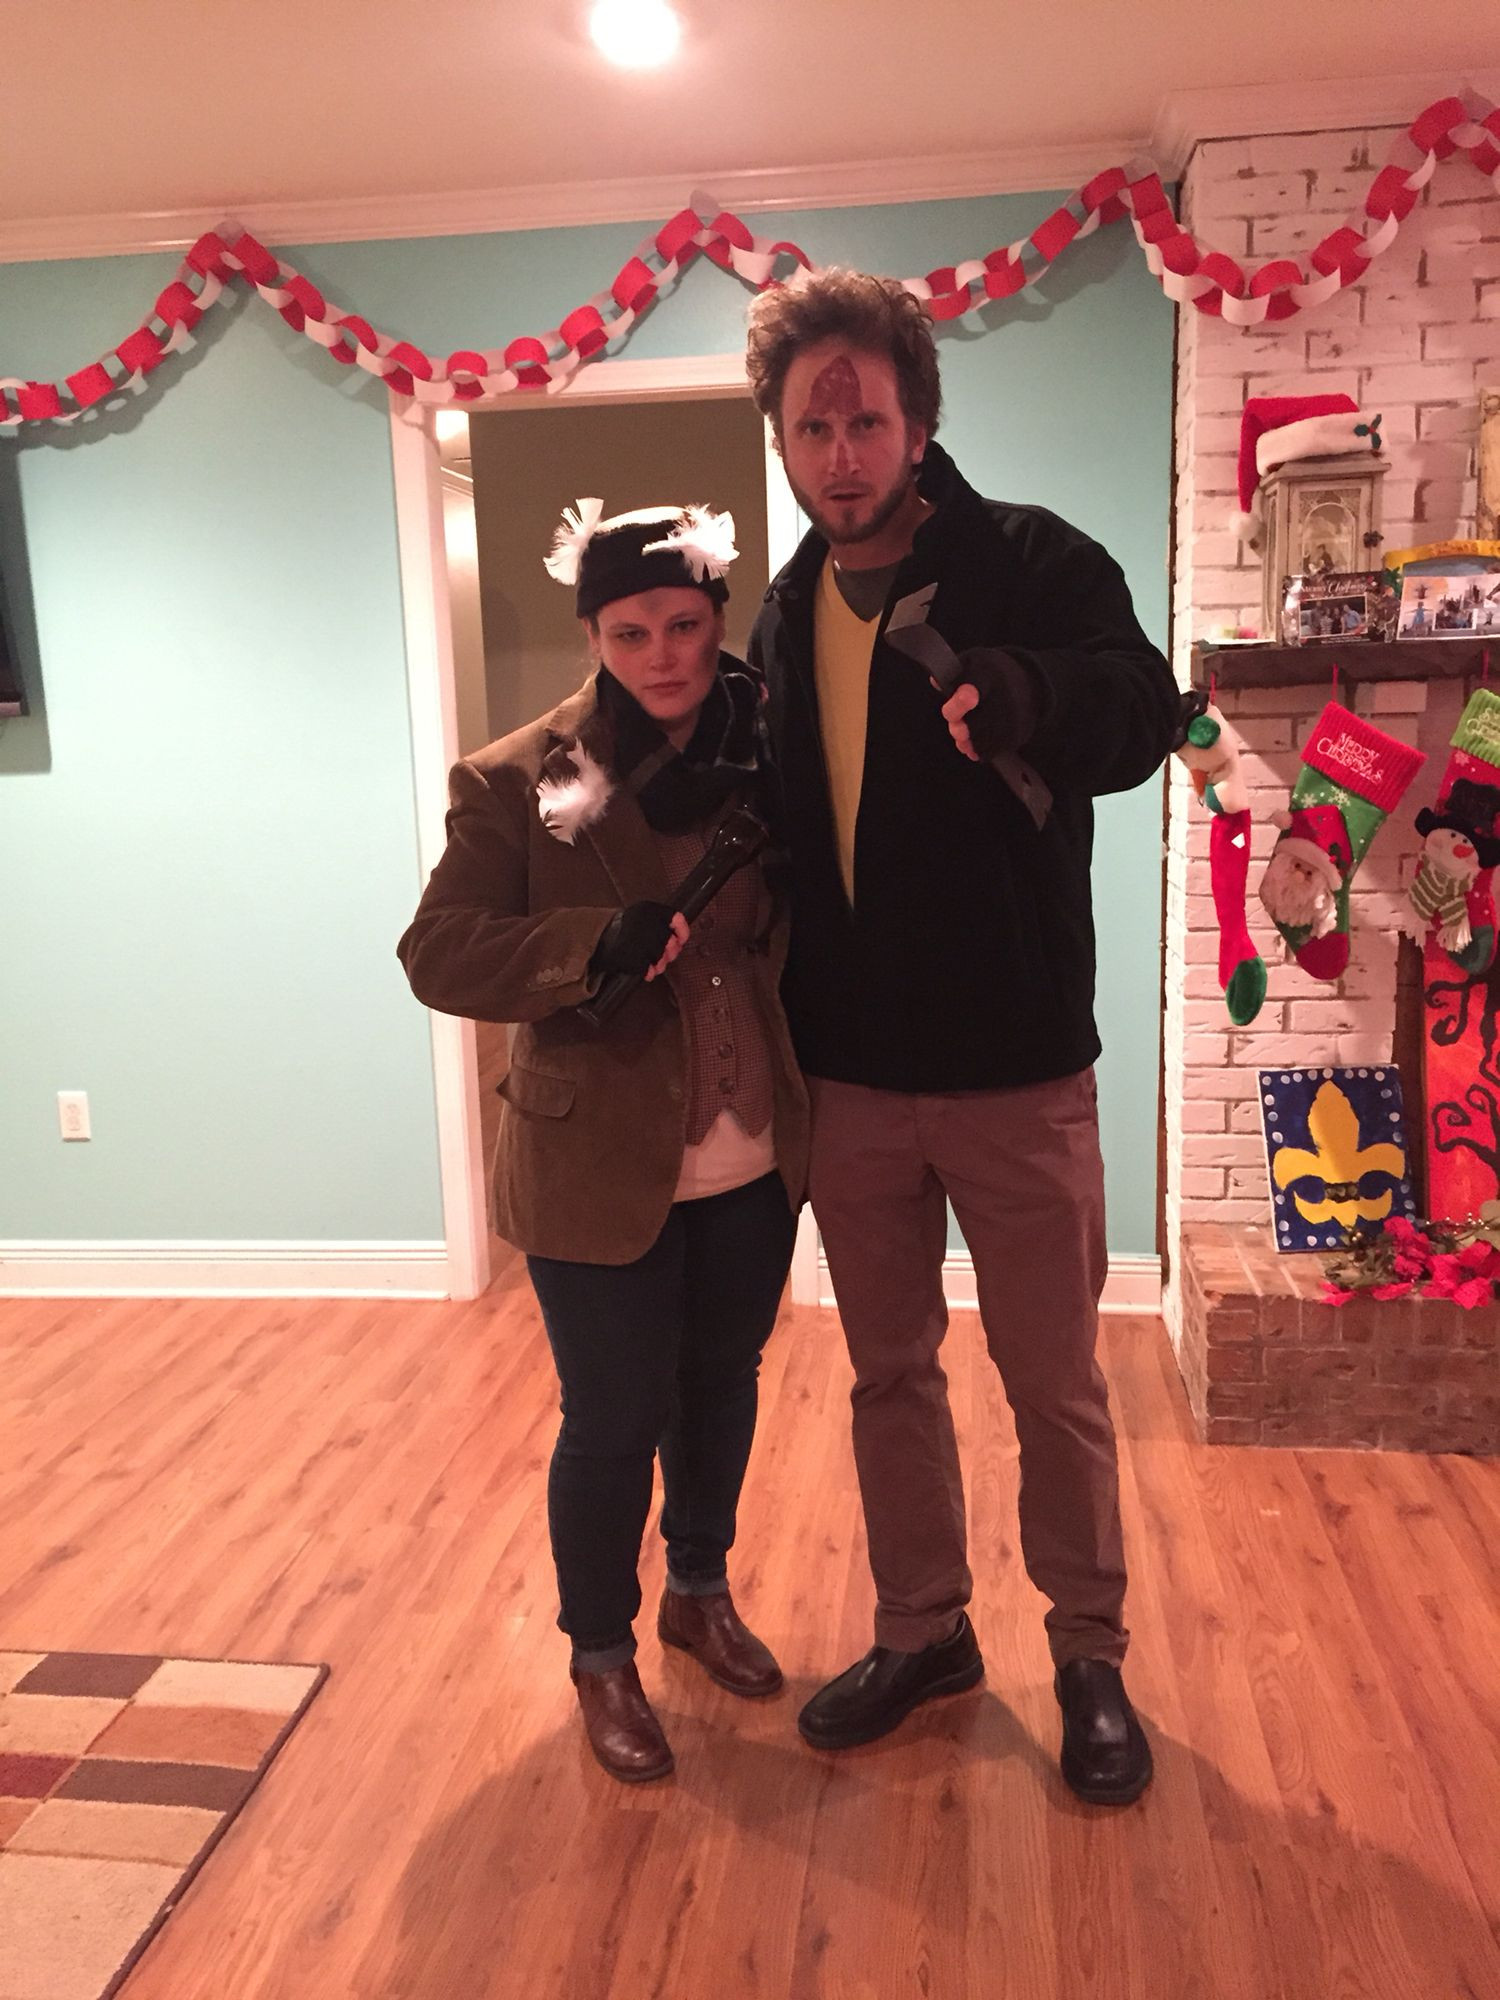 Holiday Themed Party Costume Ideas
 Adult Couple Costume Party Christmas Movie Theme "Harry